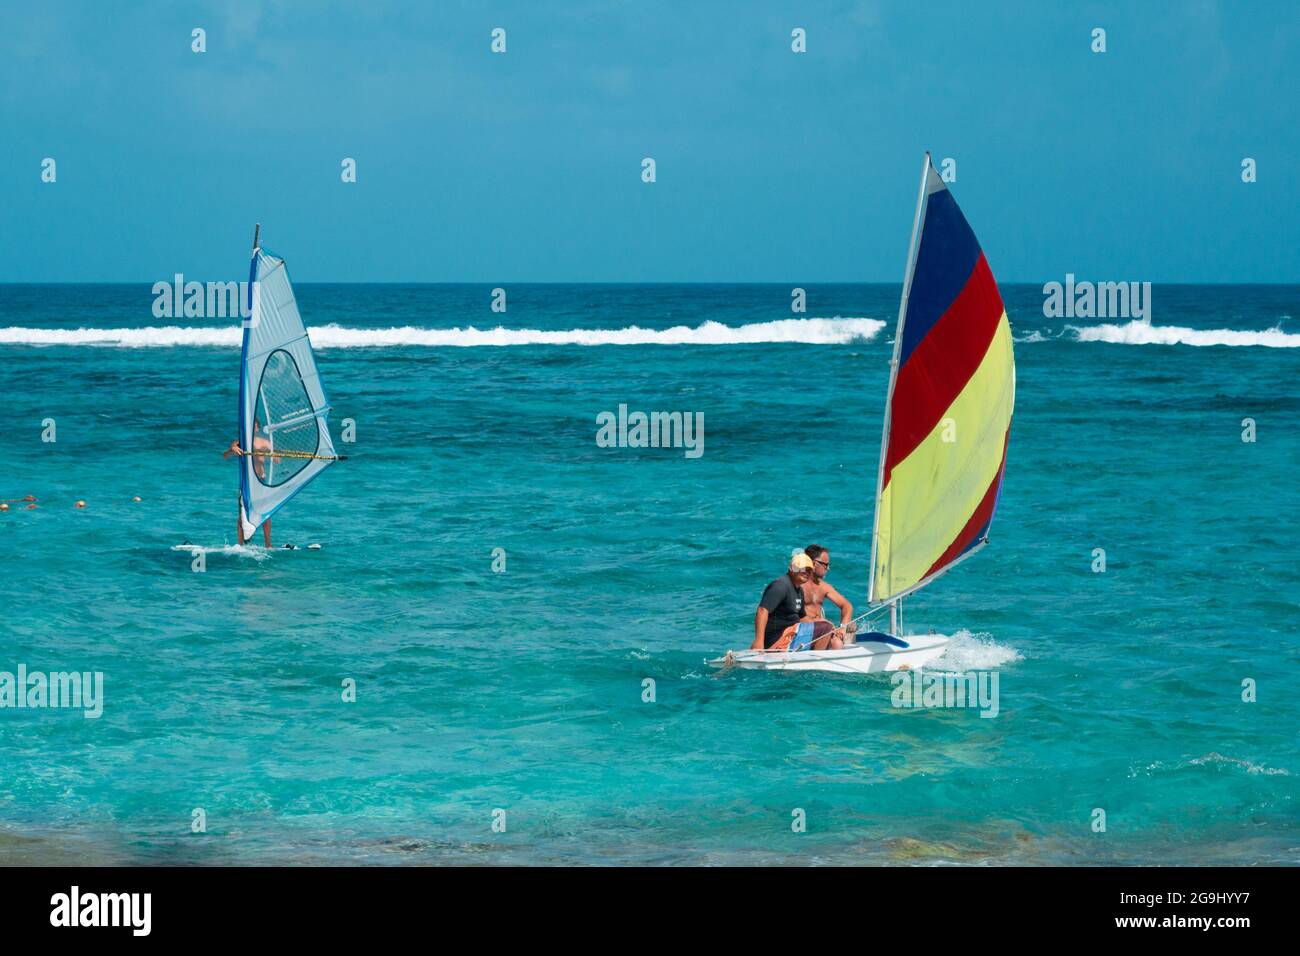 Two windsurfing boards at the Caribbean sea in the island of San Andrés, Colombia. Stock Photo